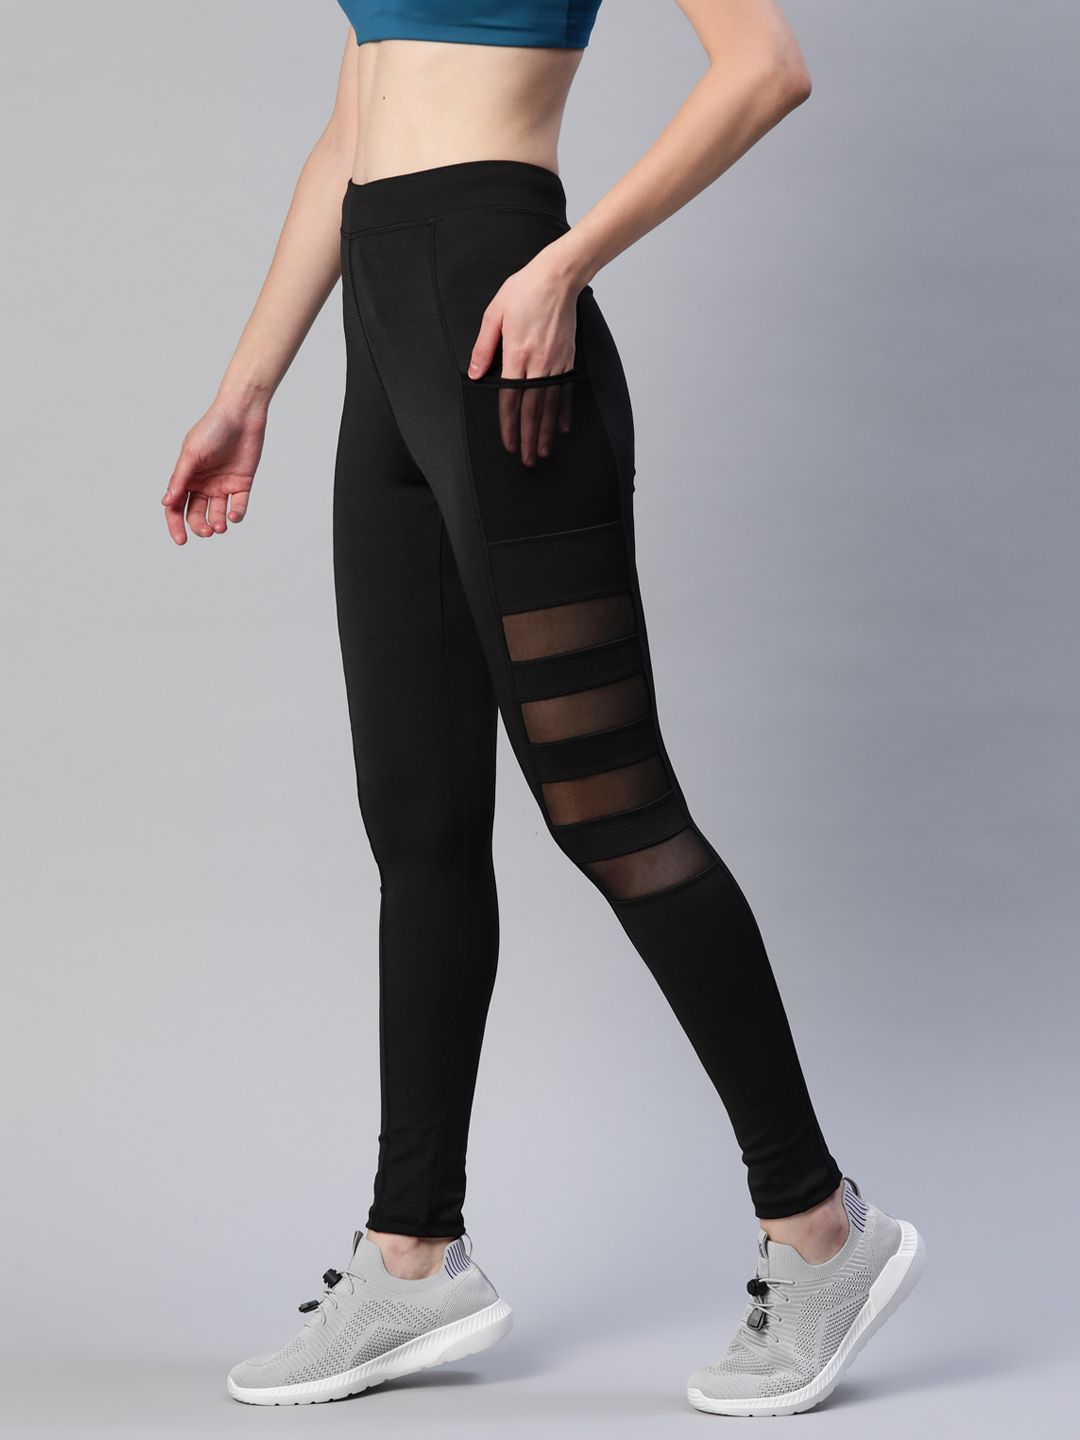 Blinkin Women Black Rapid Dry Tights With Breathable Mesh Panels & Side Pockets Price in India